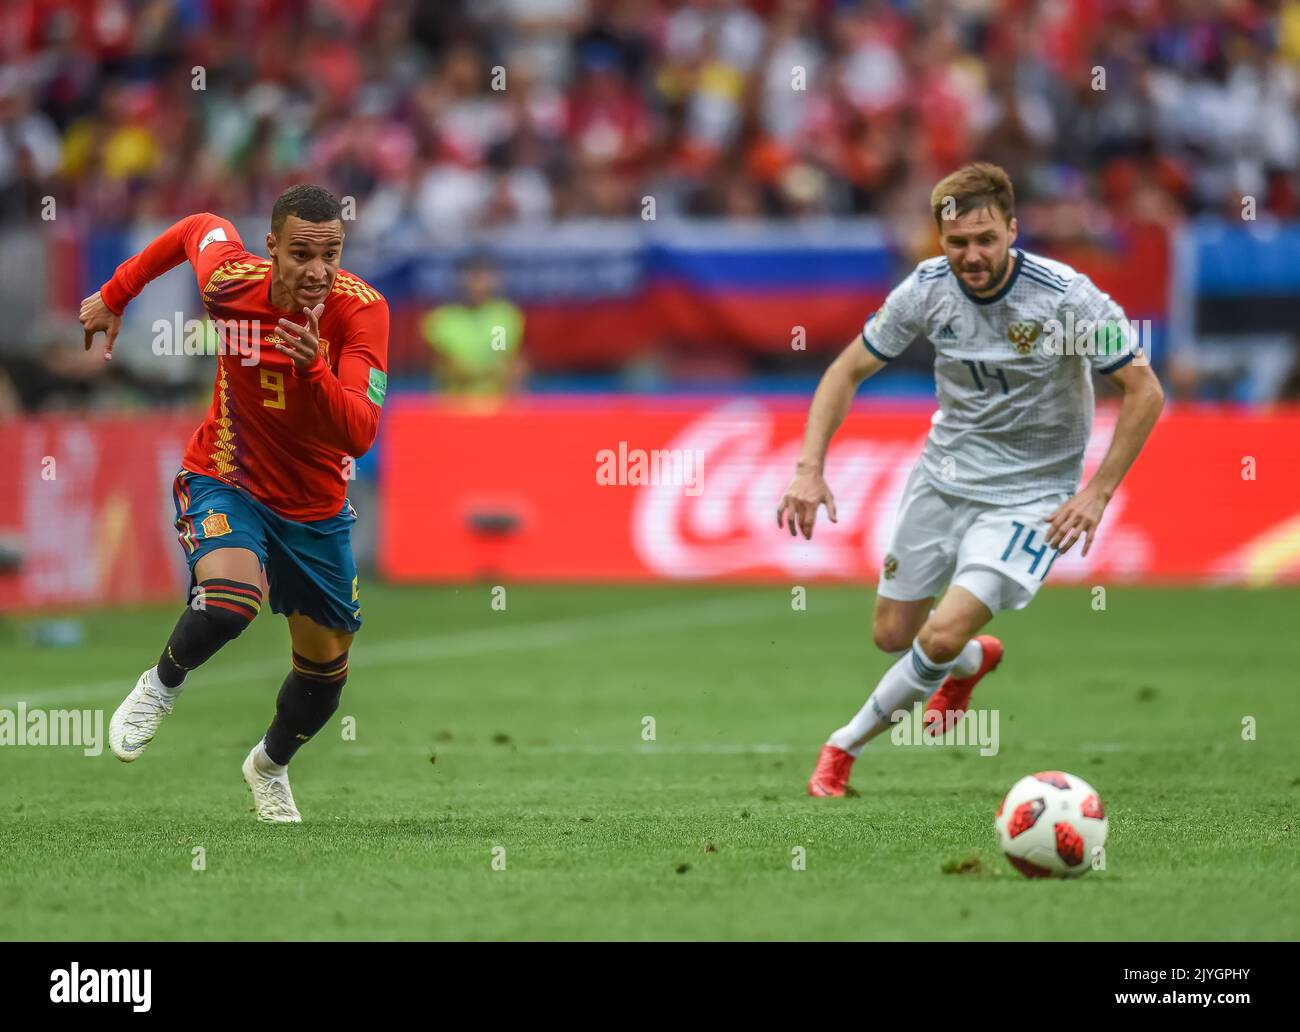 Moscow, Russia - July 1, 2018. Spain national football team winger Rodrigo in action during FIFA World Cup 2018 quarterfinal Spain vs Russia (1-1) Stock Photo